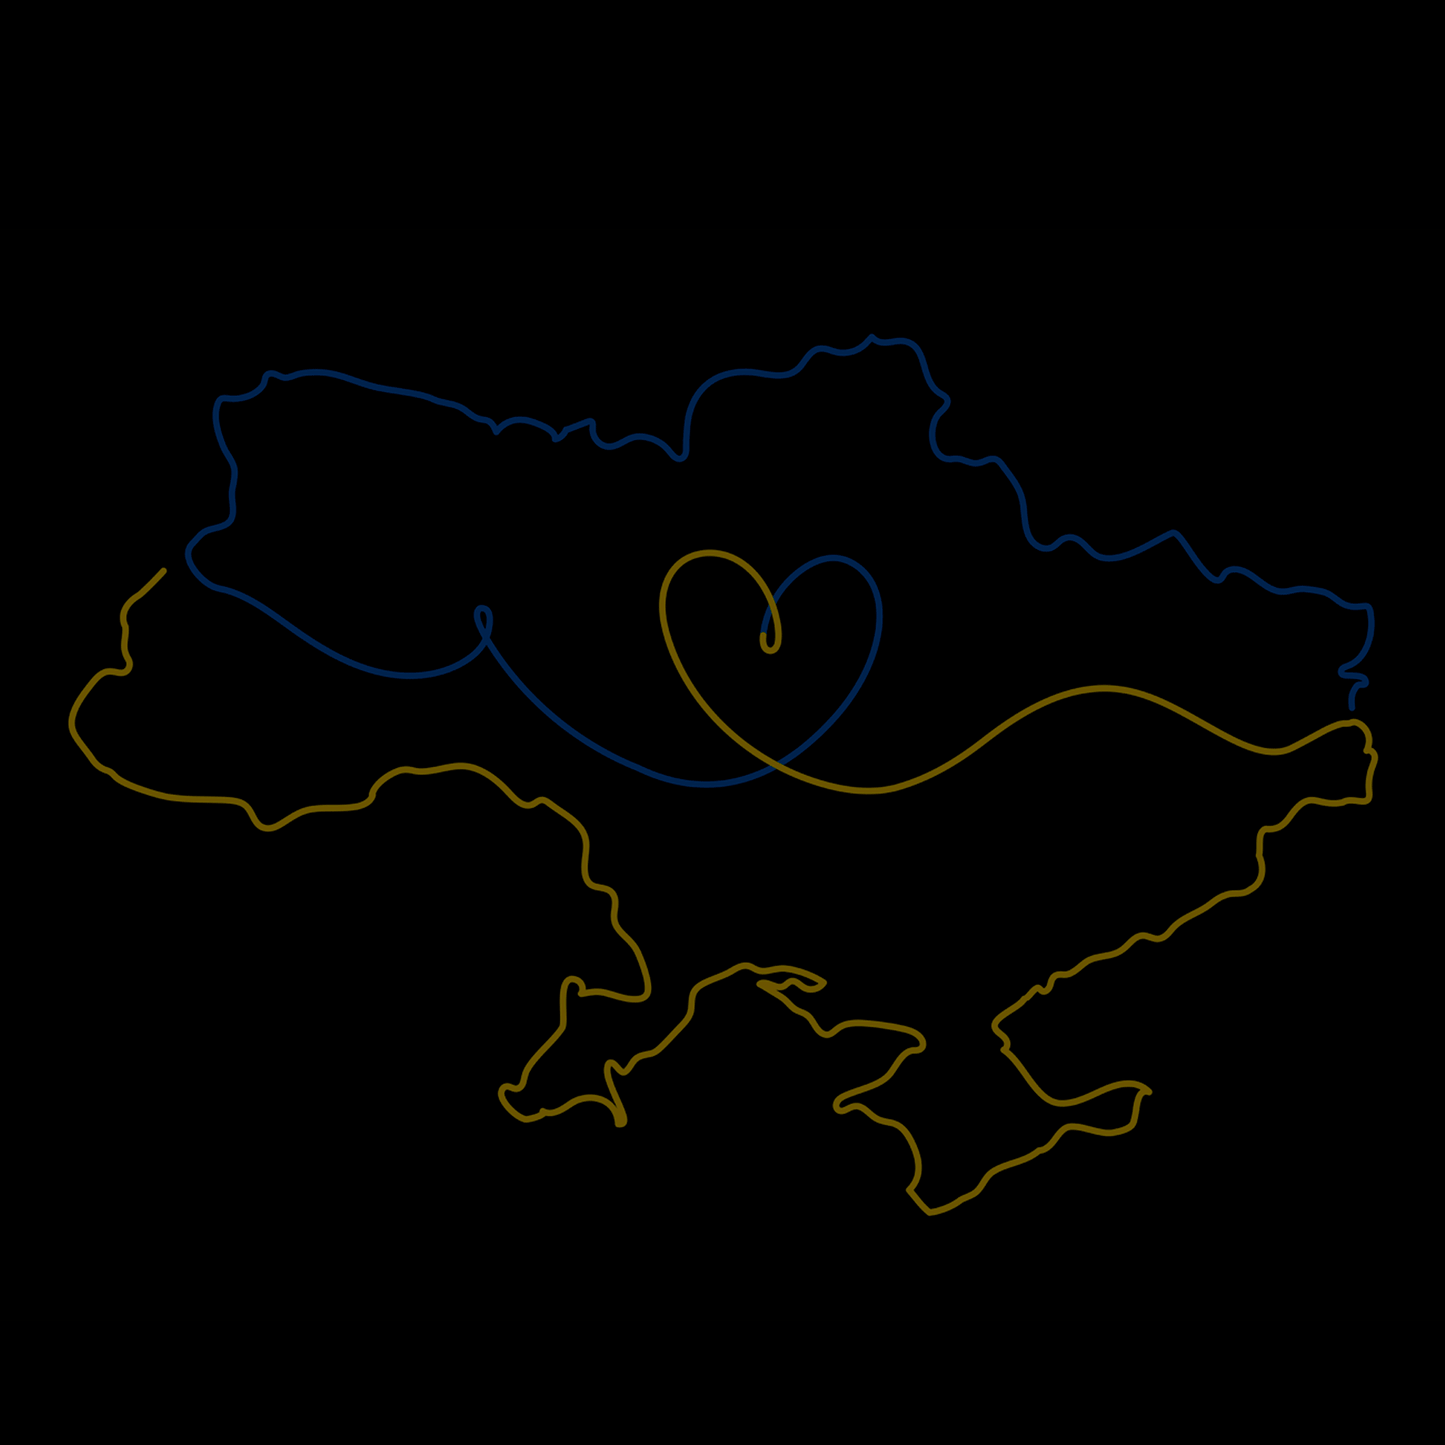 Ukraine Map Electric Car Sticker by CutNinja™ - SPALAH - Collection of Glowing Led Stickers